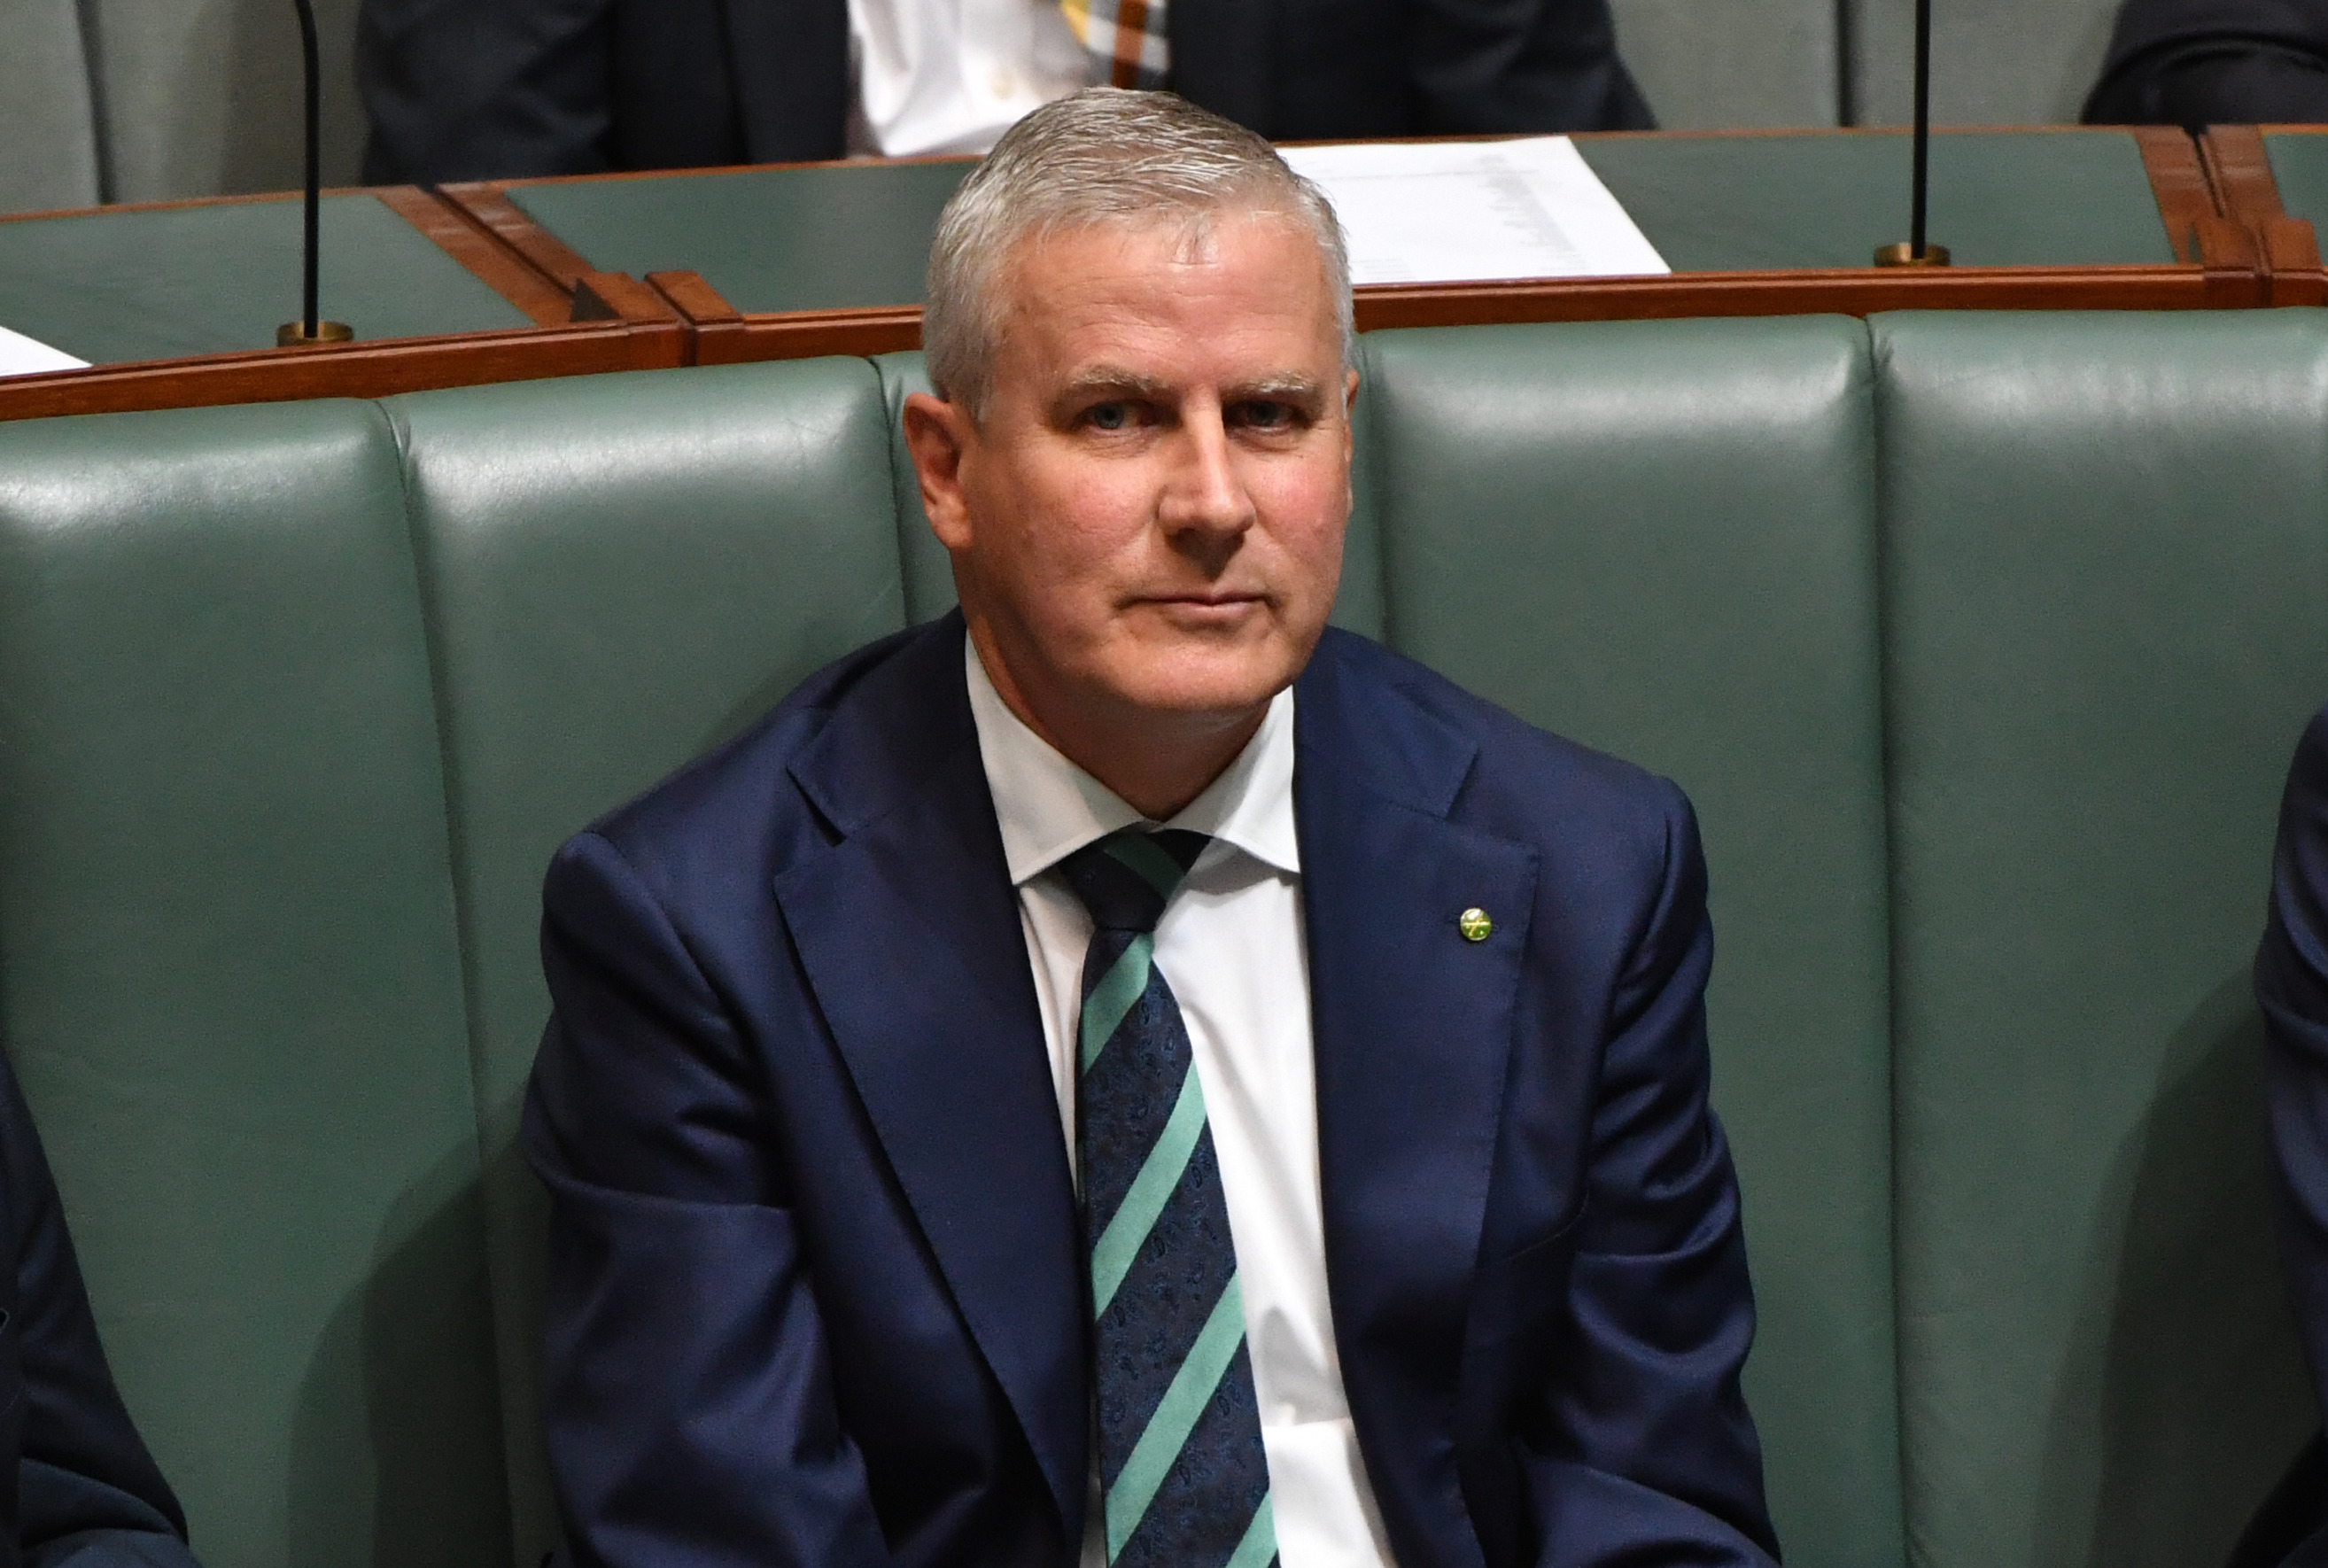 G’day Folks, Looks Like This Guy Will Be Your New Deputy PM Today